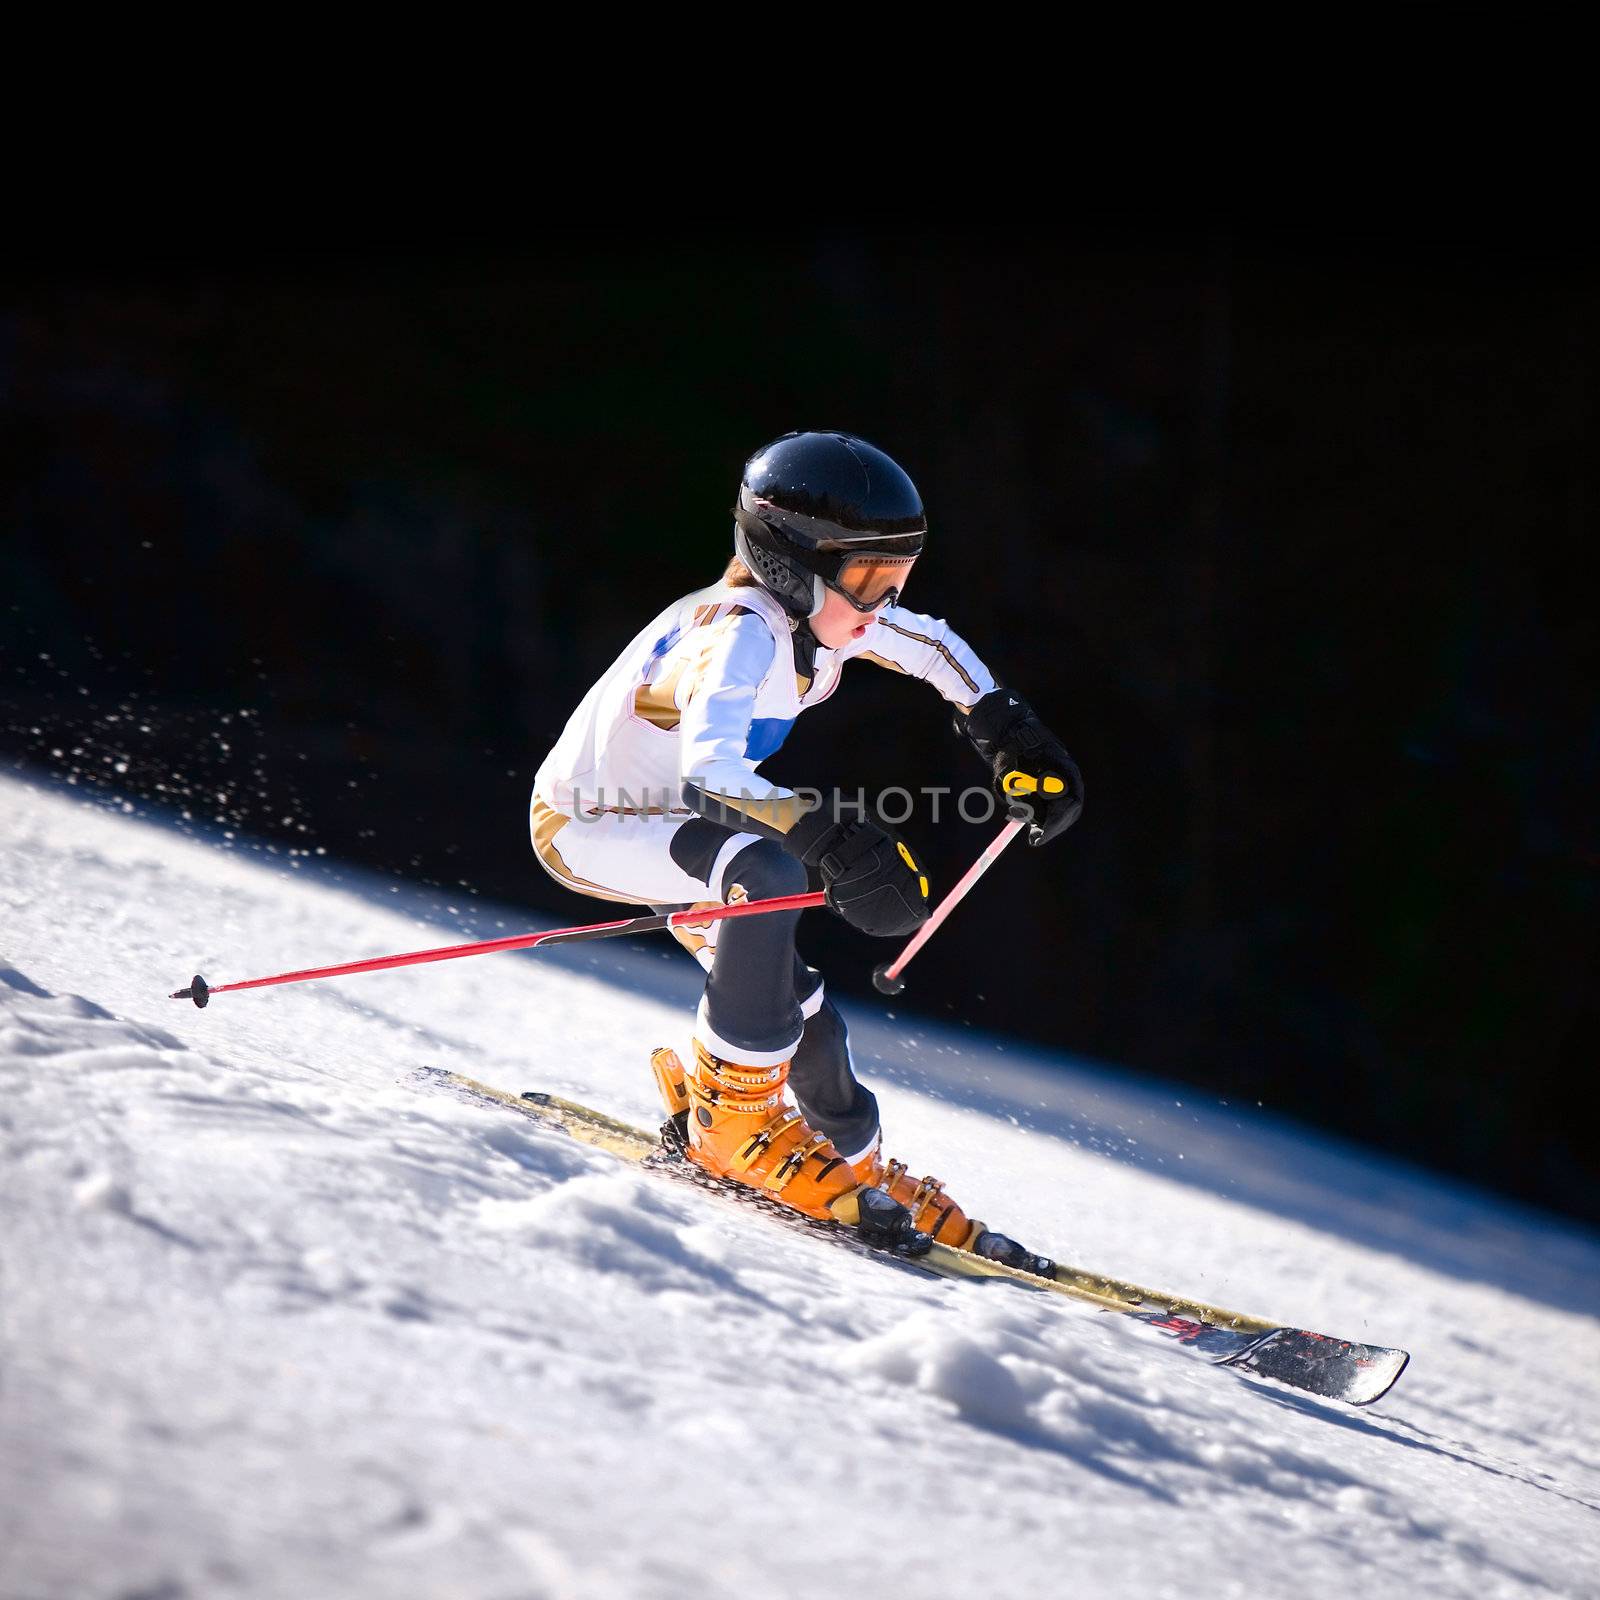 A close up action shot of a downhill skiier